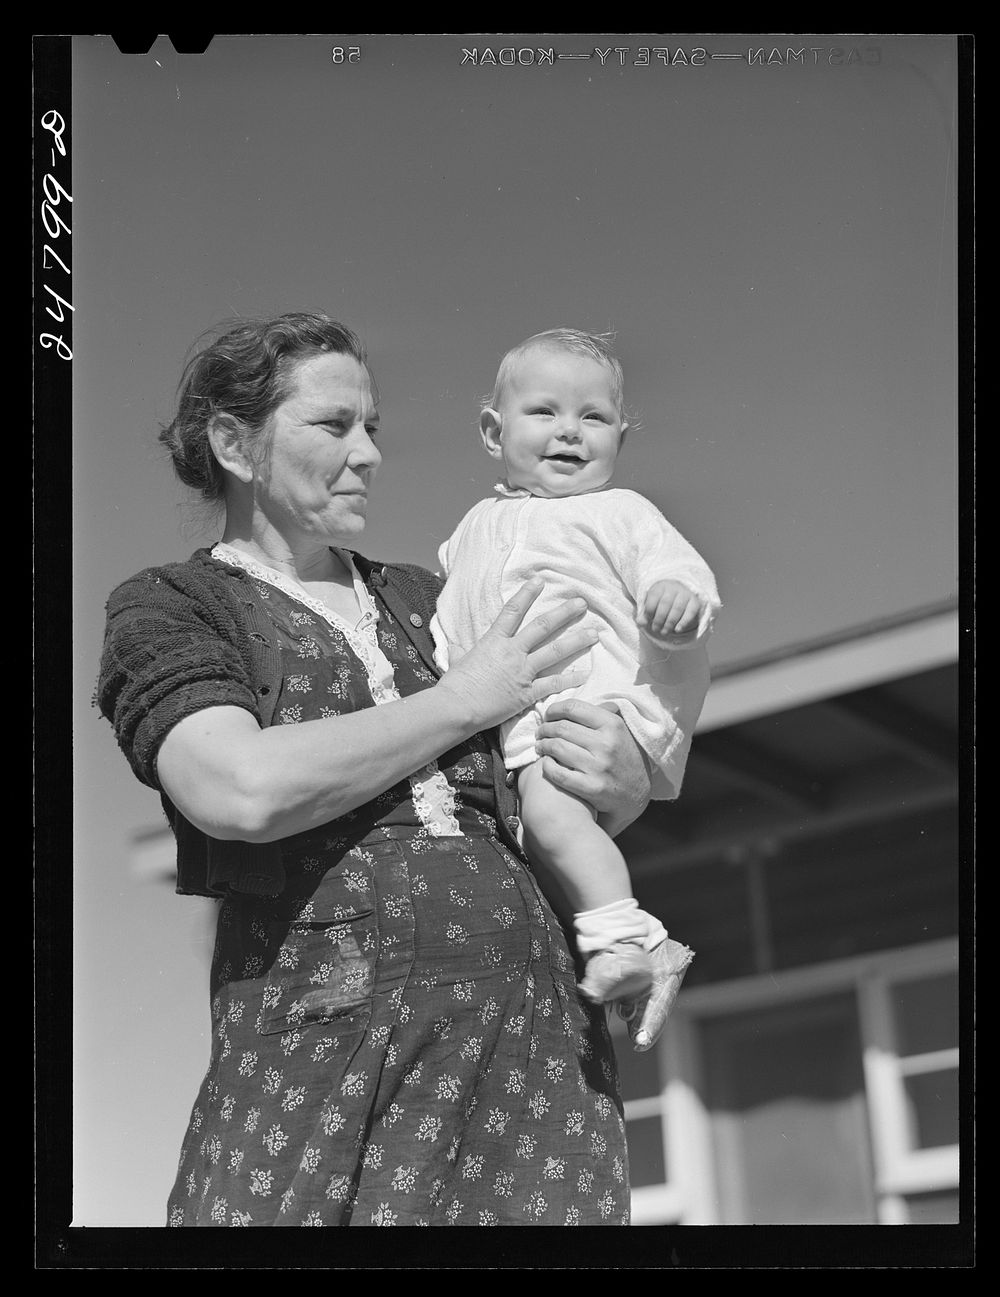 A camper and her baby. Robstown camp, Texas. Sourced from the Library of Congress.